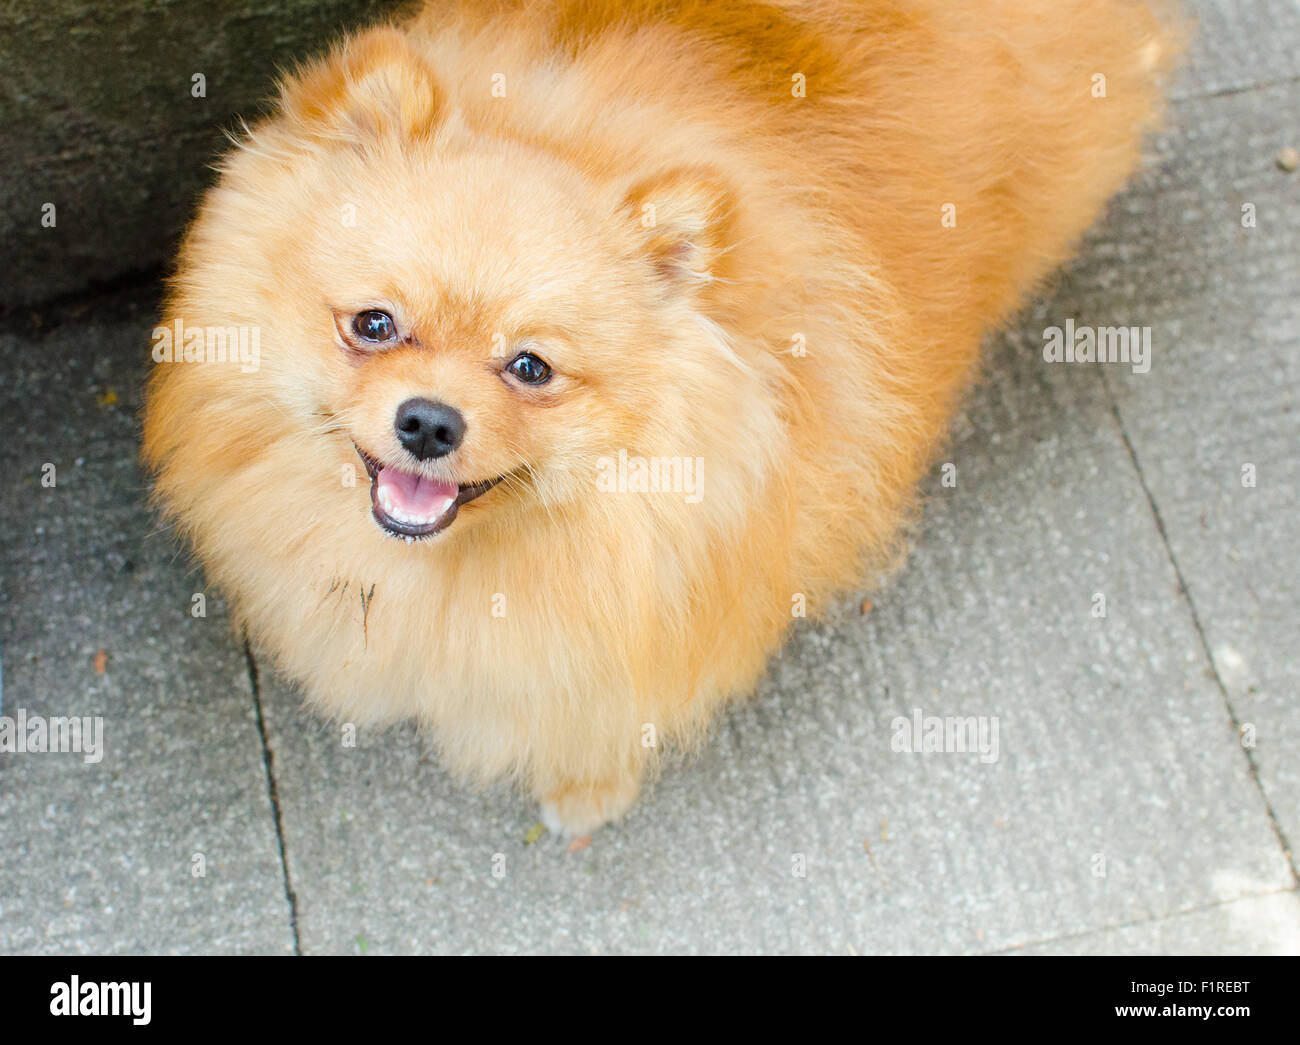 A little cute pomeranian poppy is looking at you with his little face, smiling. Stock Photo